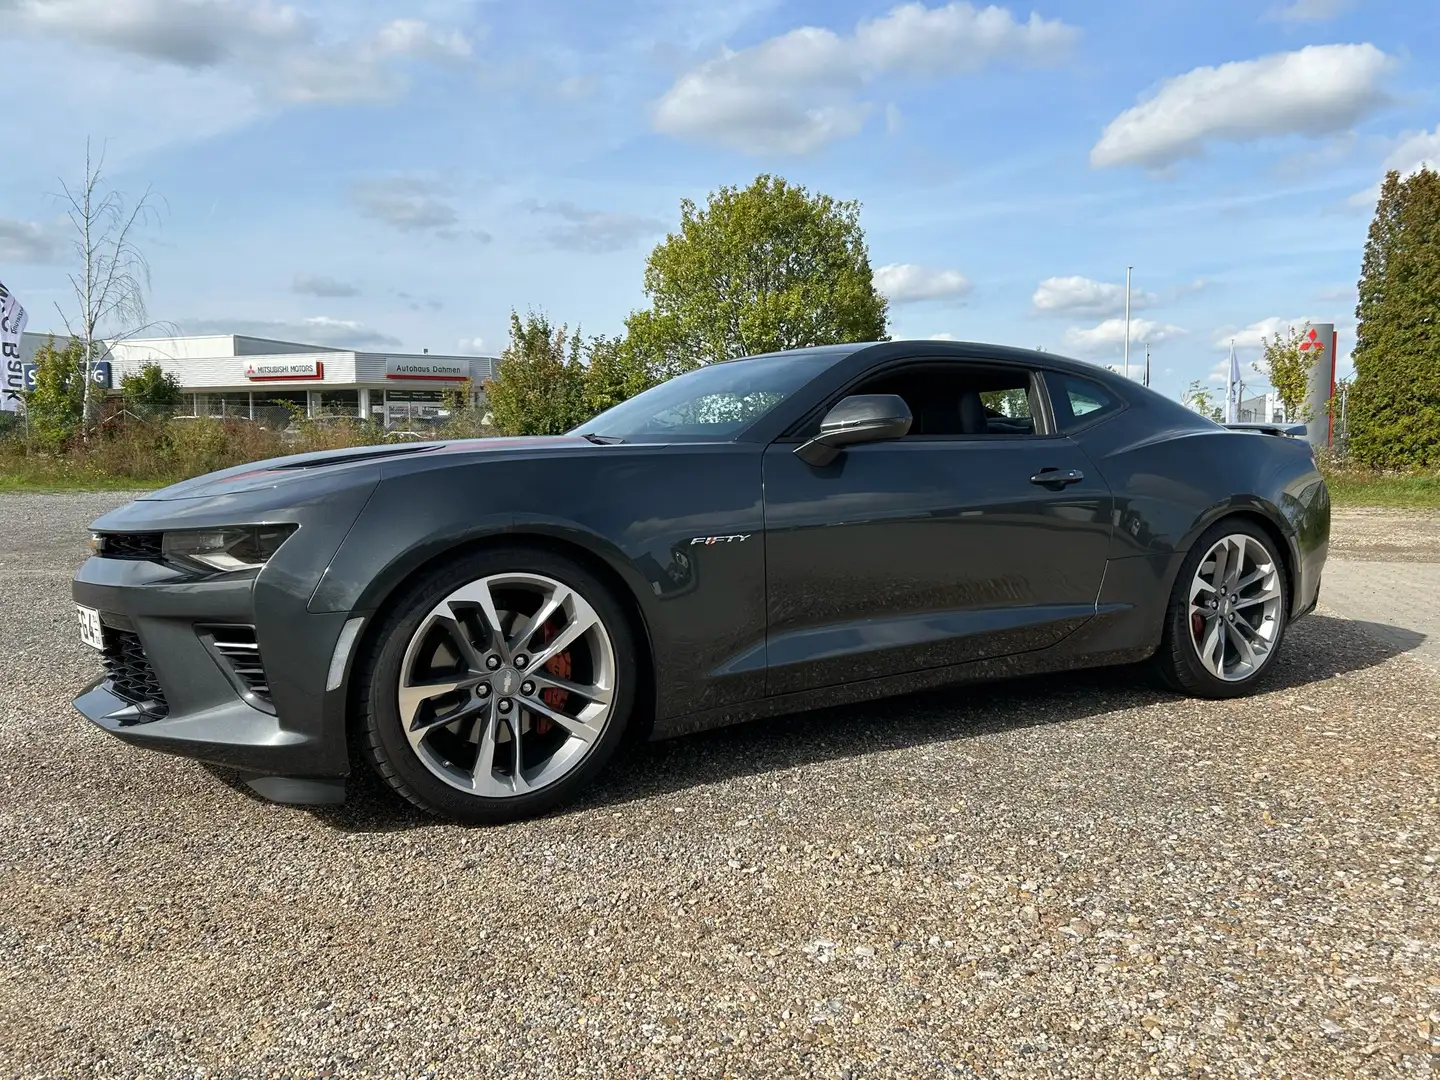 Chevrolet Camaro Coupe 6.2 V8 Fifty Limited Edition Grijs - 1